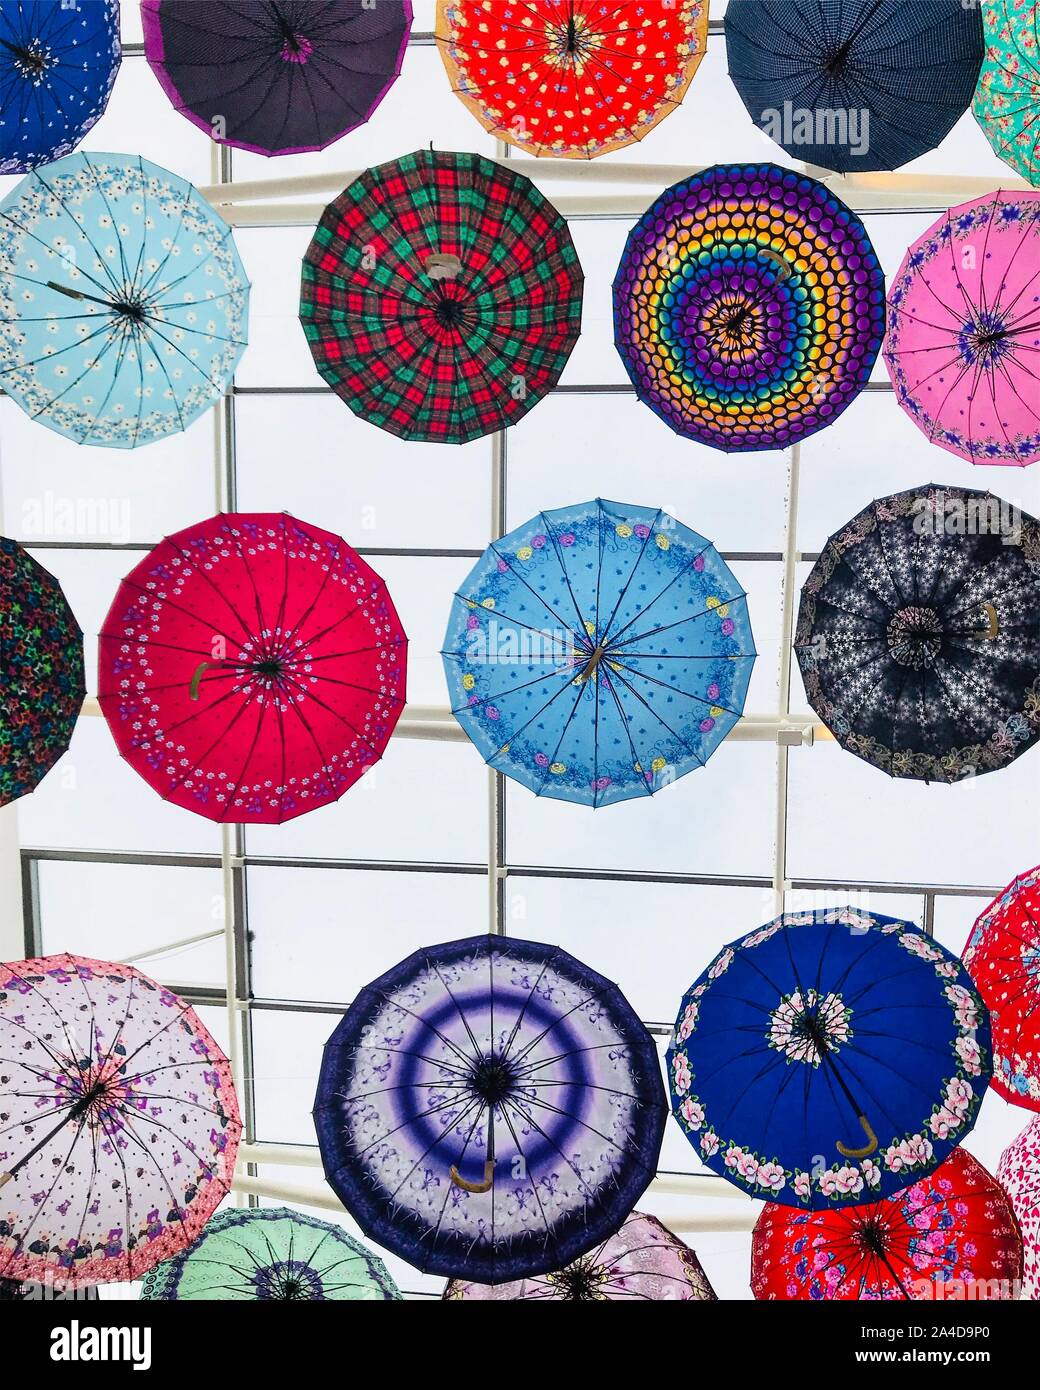 Low angle view of umbrellas hanging in city, Kuwait Stock Photo